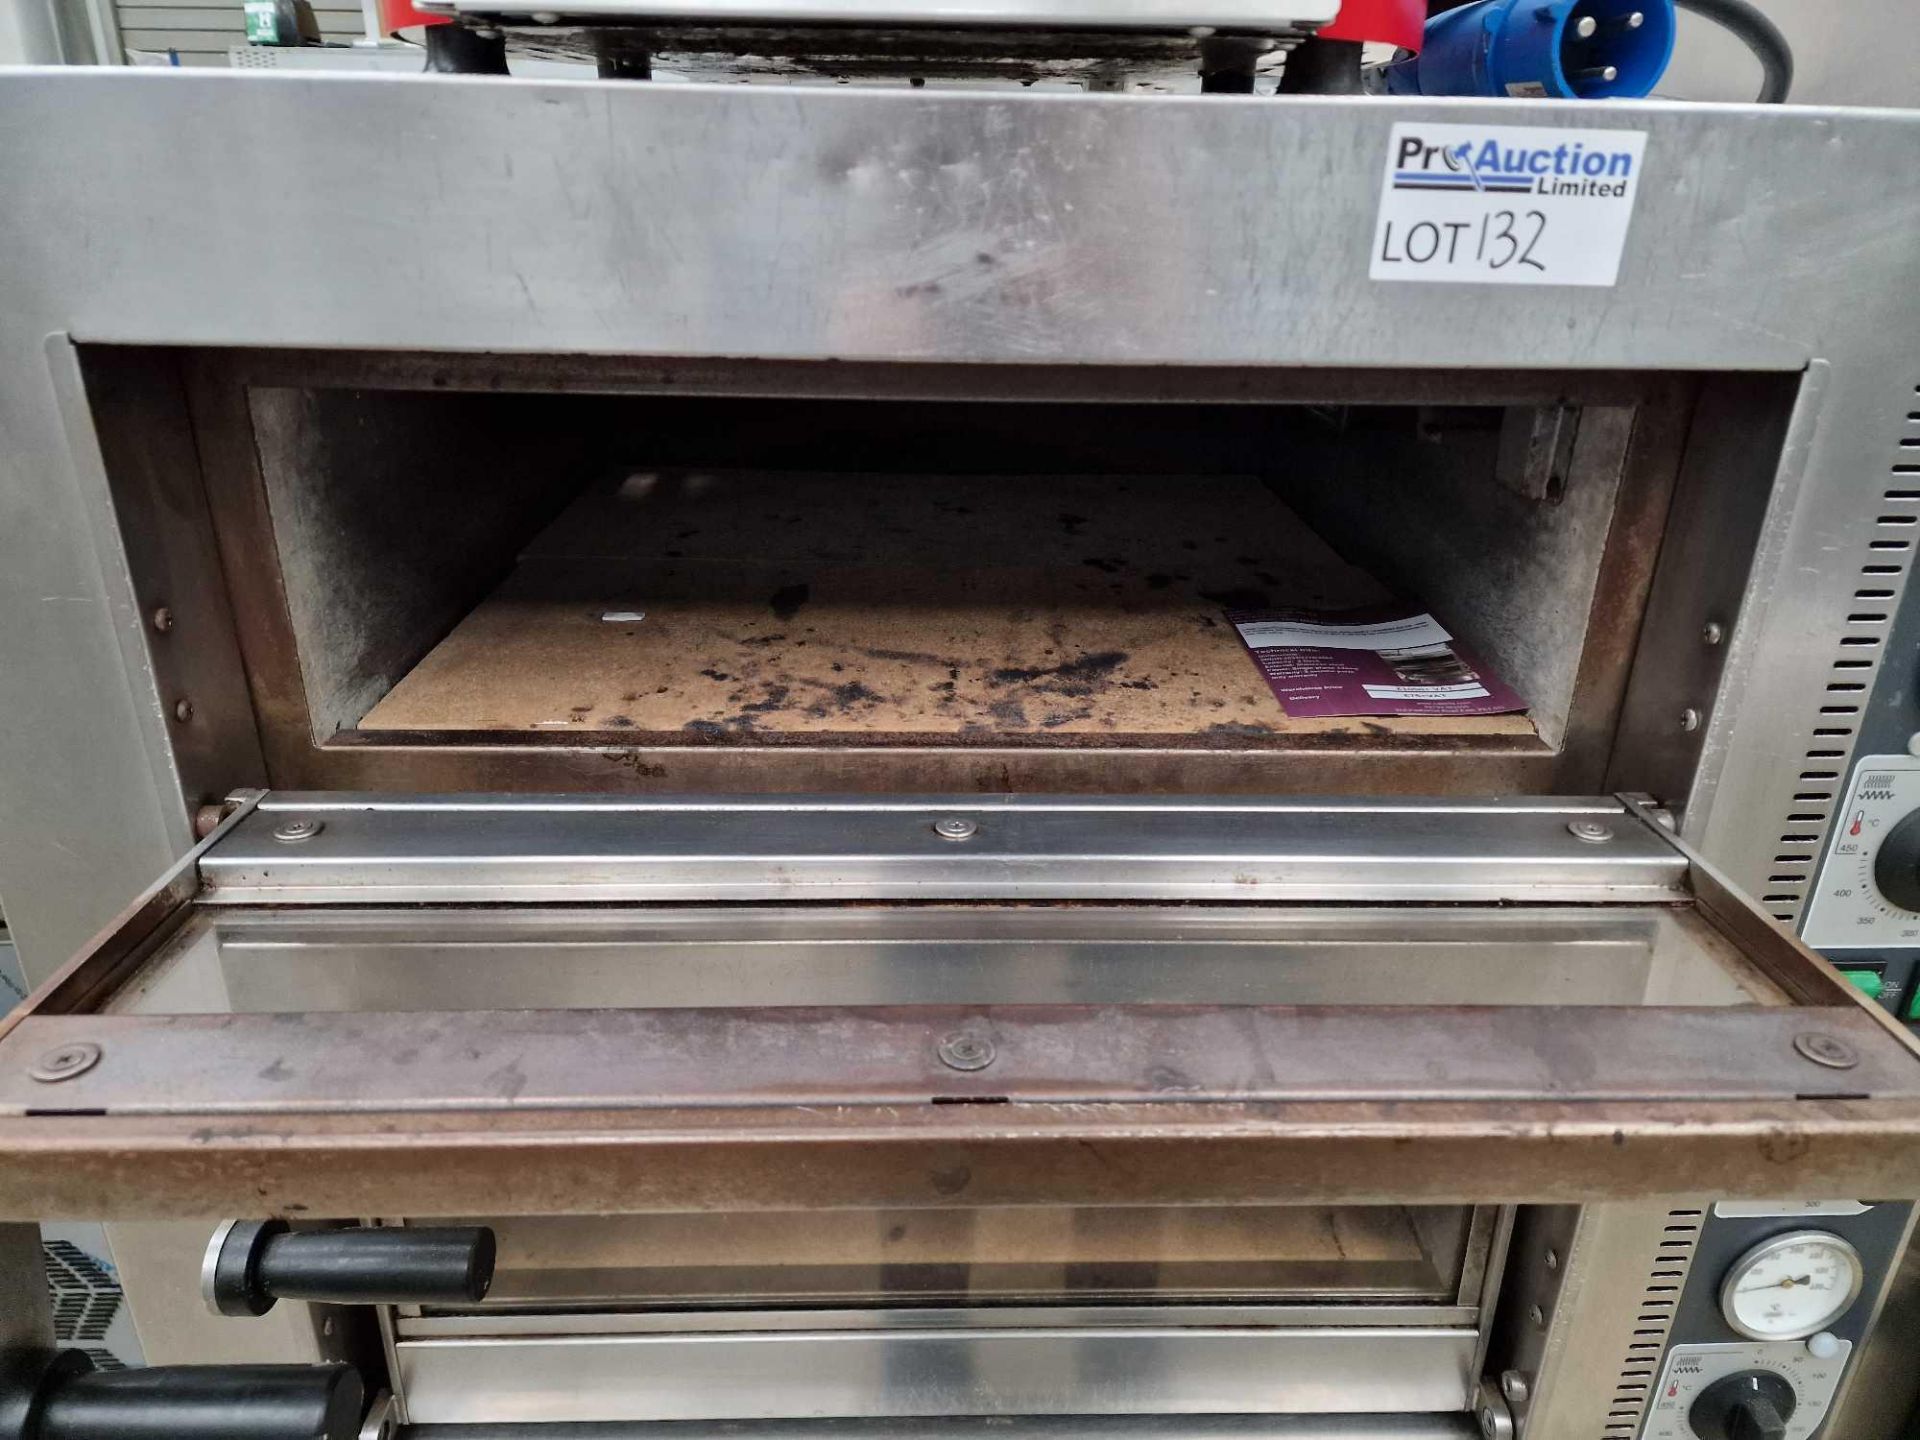 Linda Lewis Stainless Steel Twin Deck Pizza Oven Tech Spec: TZ425/2M-A5-CP, Single Phase, - Image 4 of 4